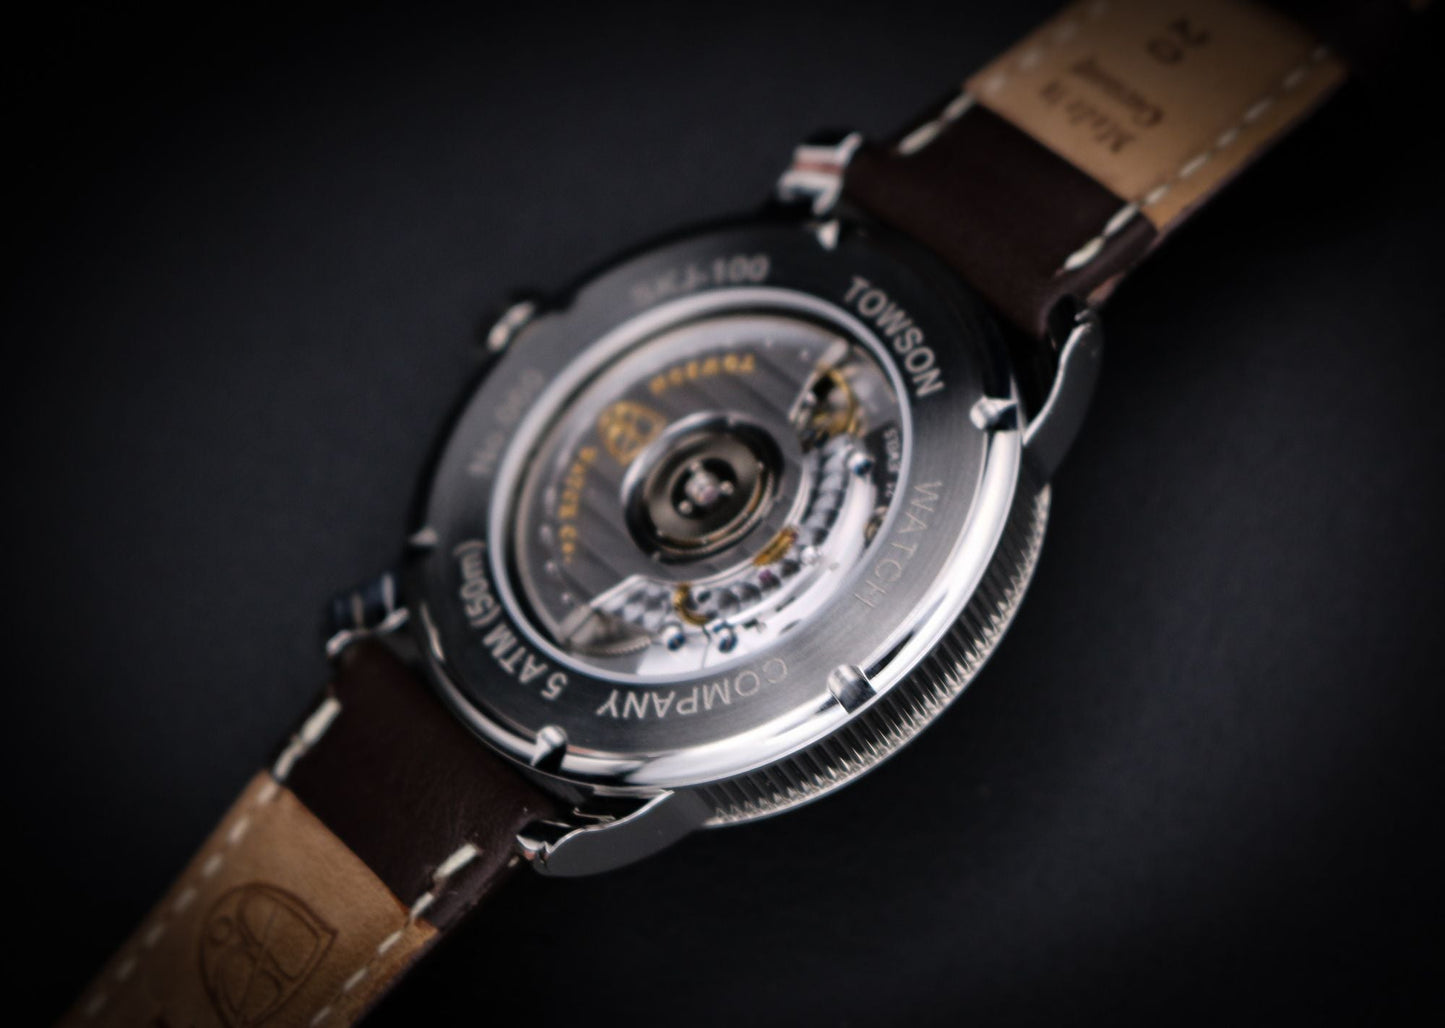 Towson Watch Company - Skipjack GMT Limited Collection - Maple City Timepieces